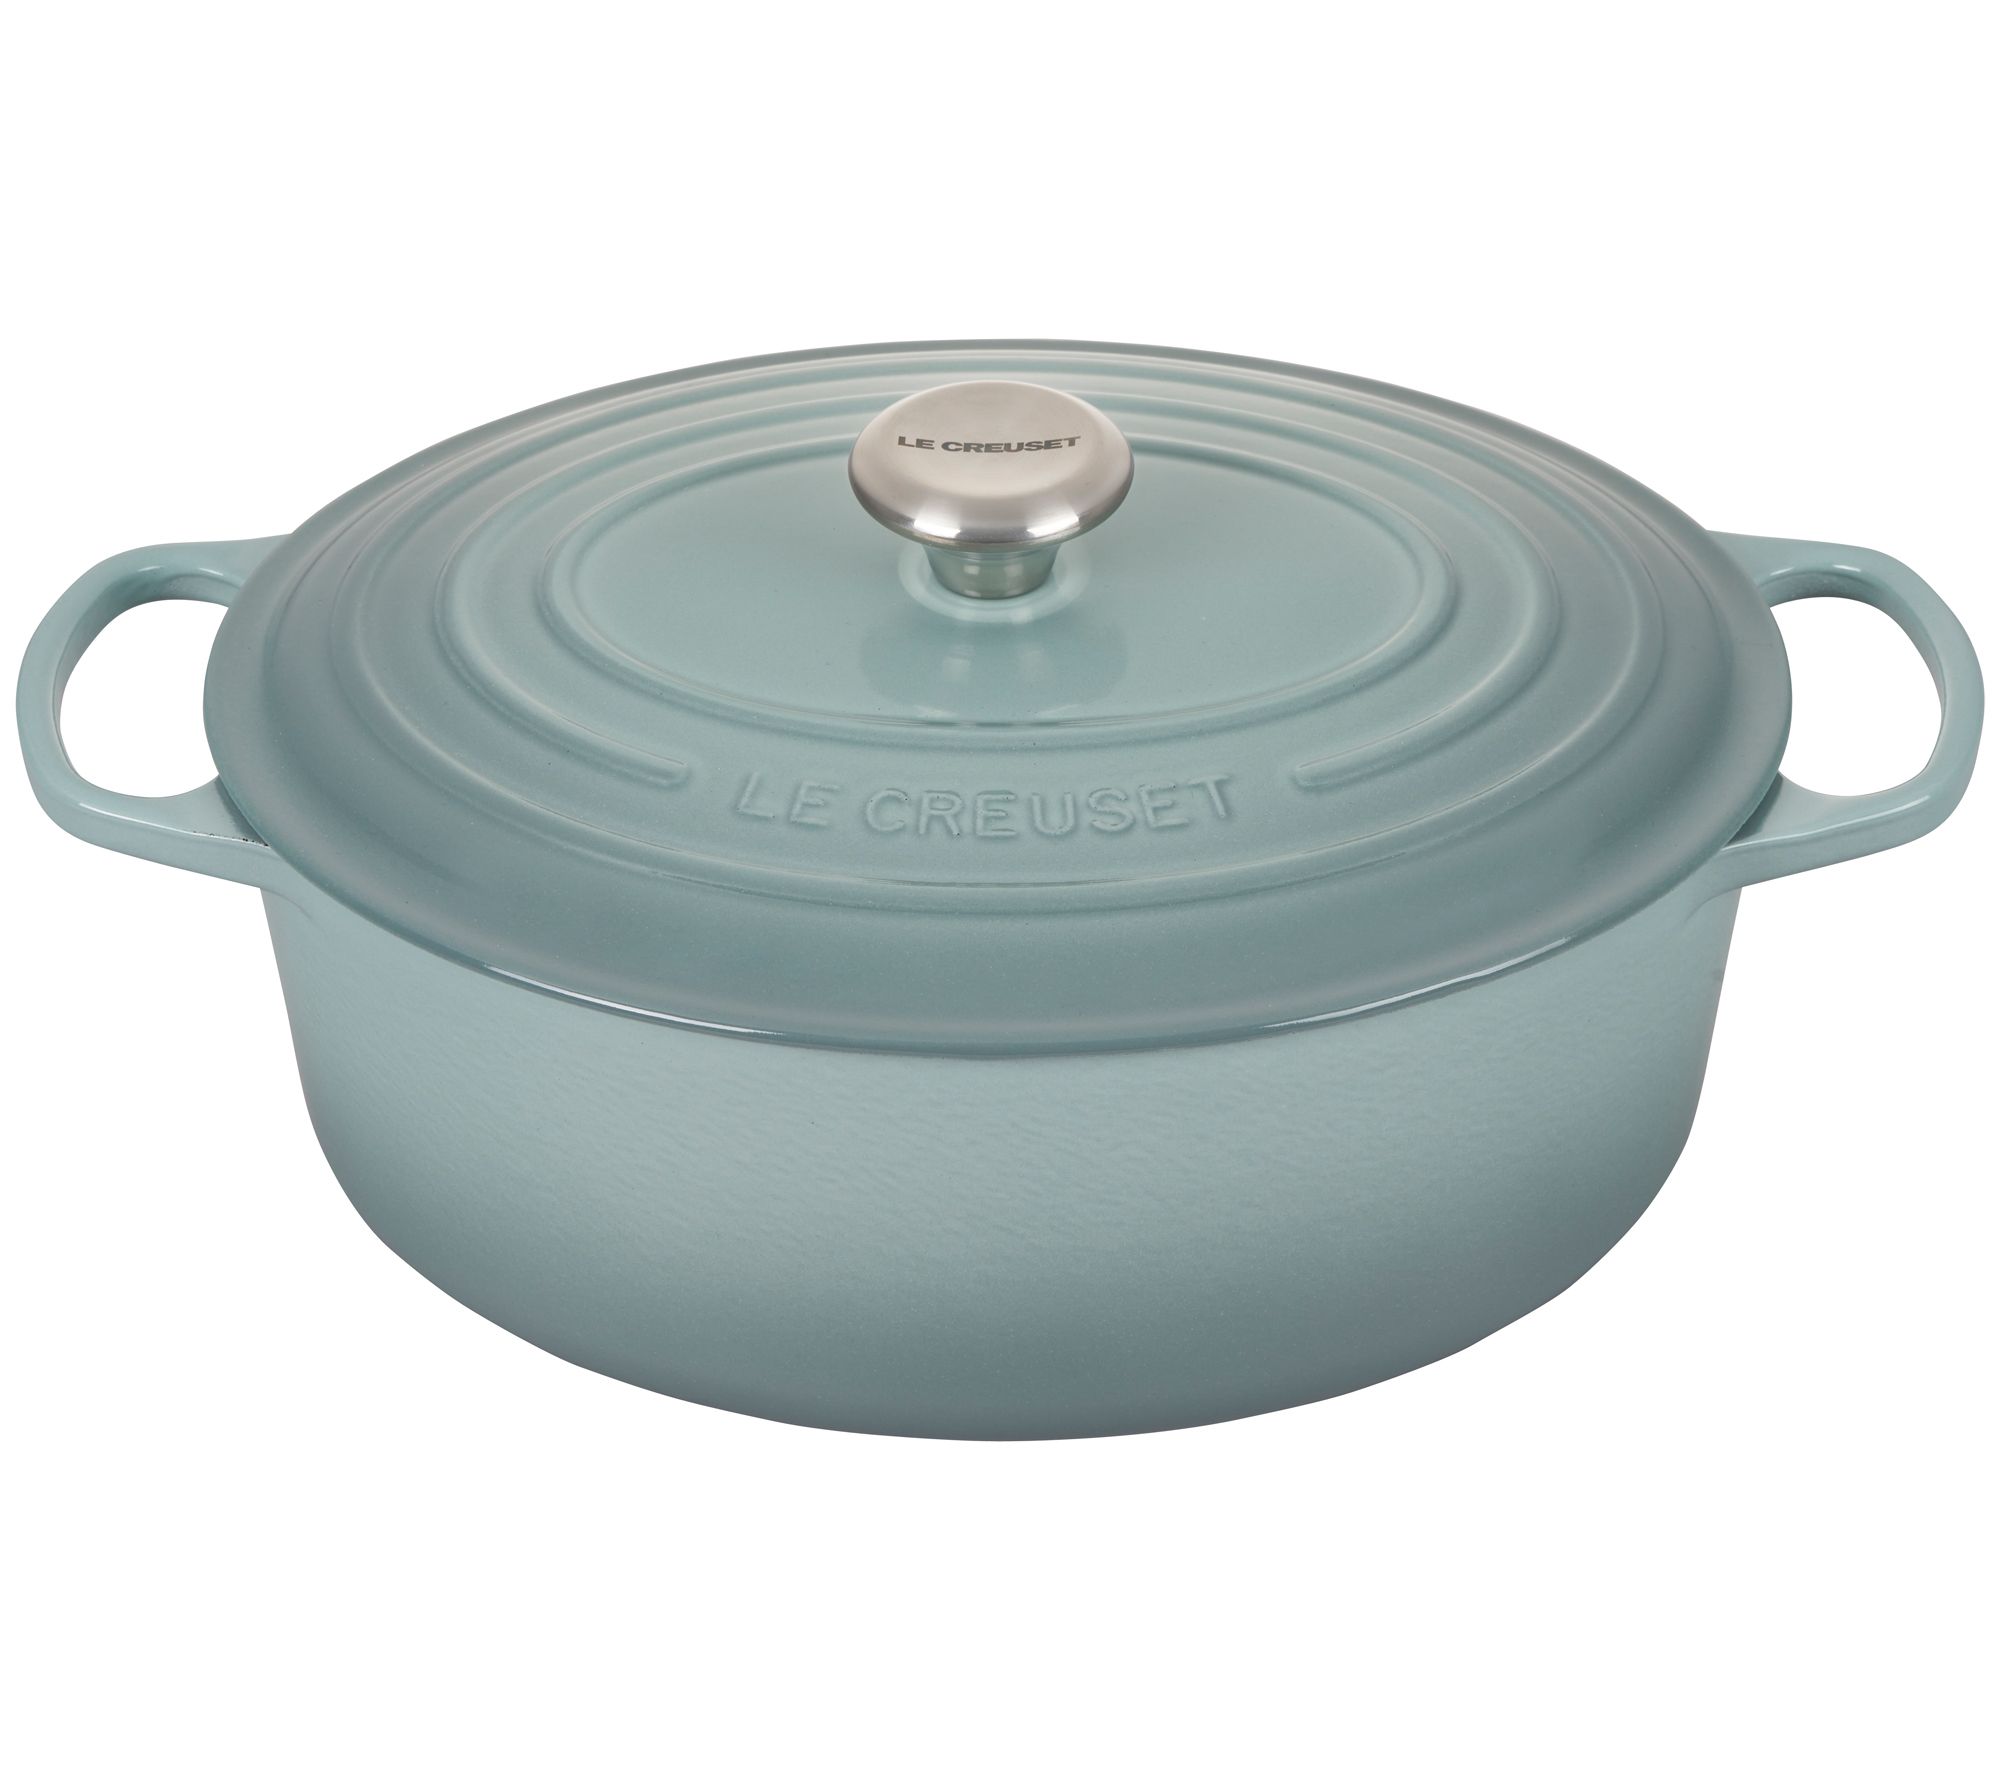 Le Creuset 15.75 Cast Iron Oval Skillet & Silicone Sleeve on QVC 